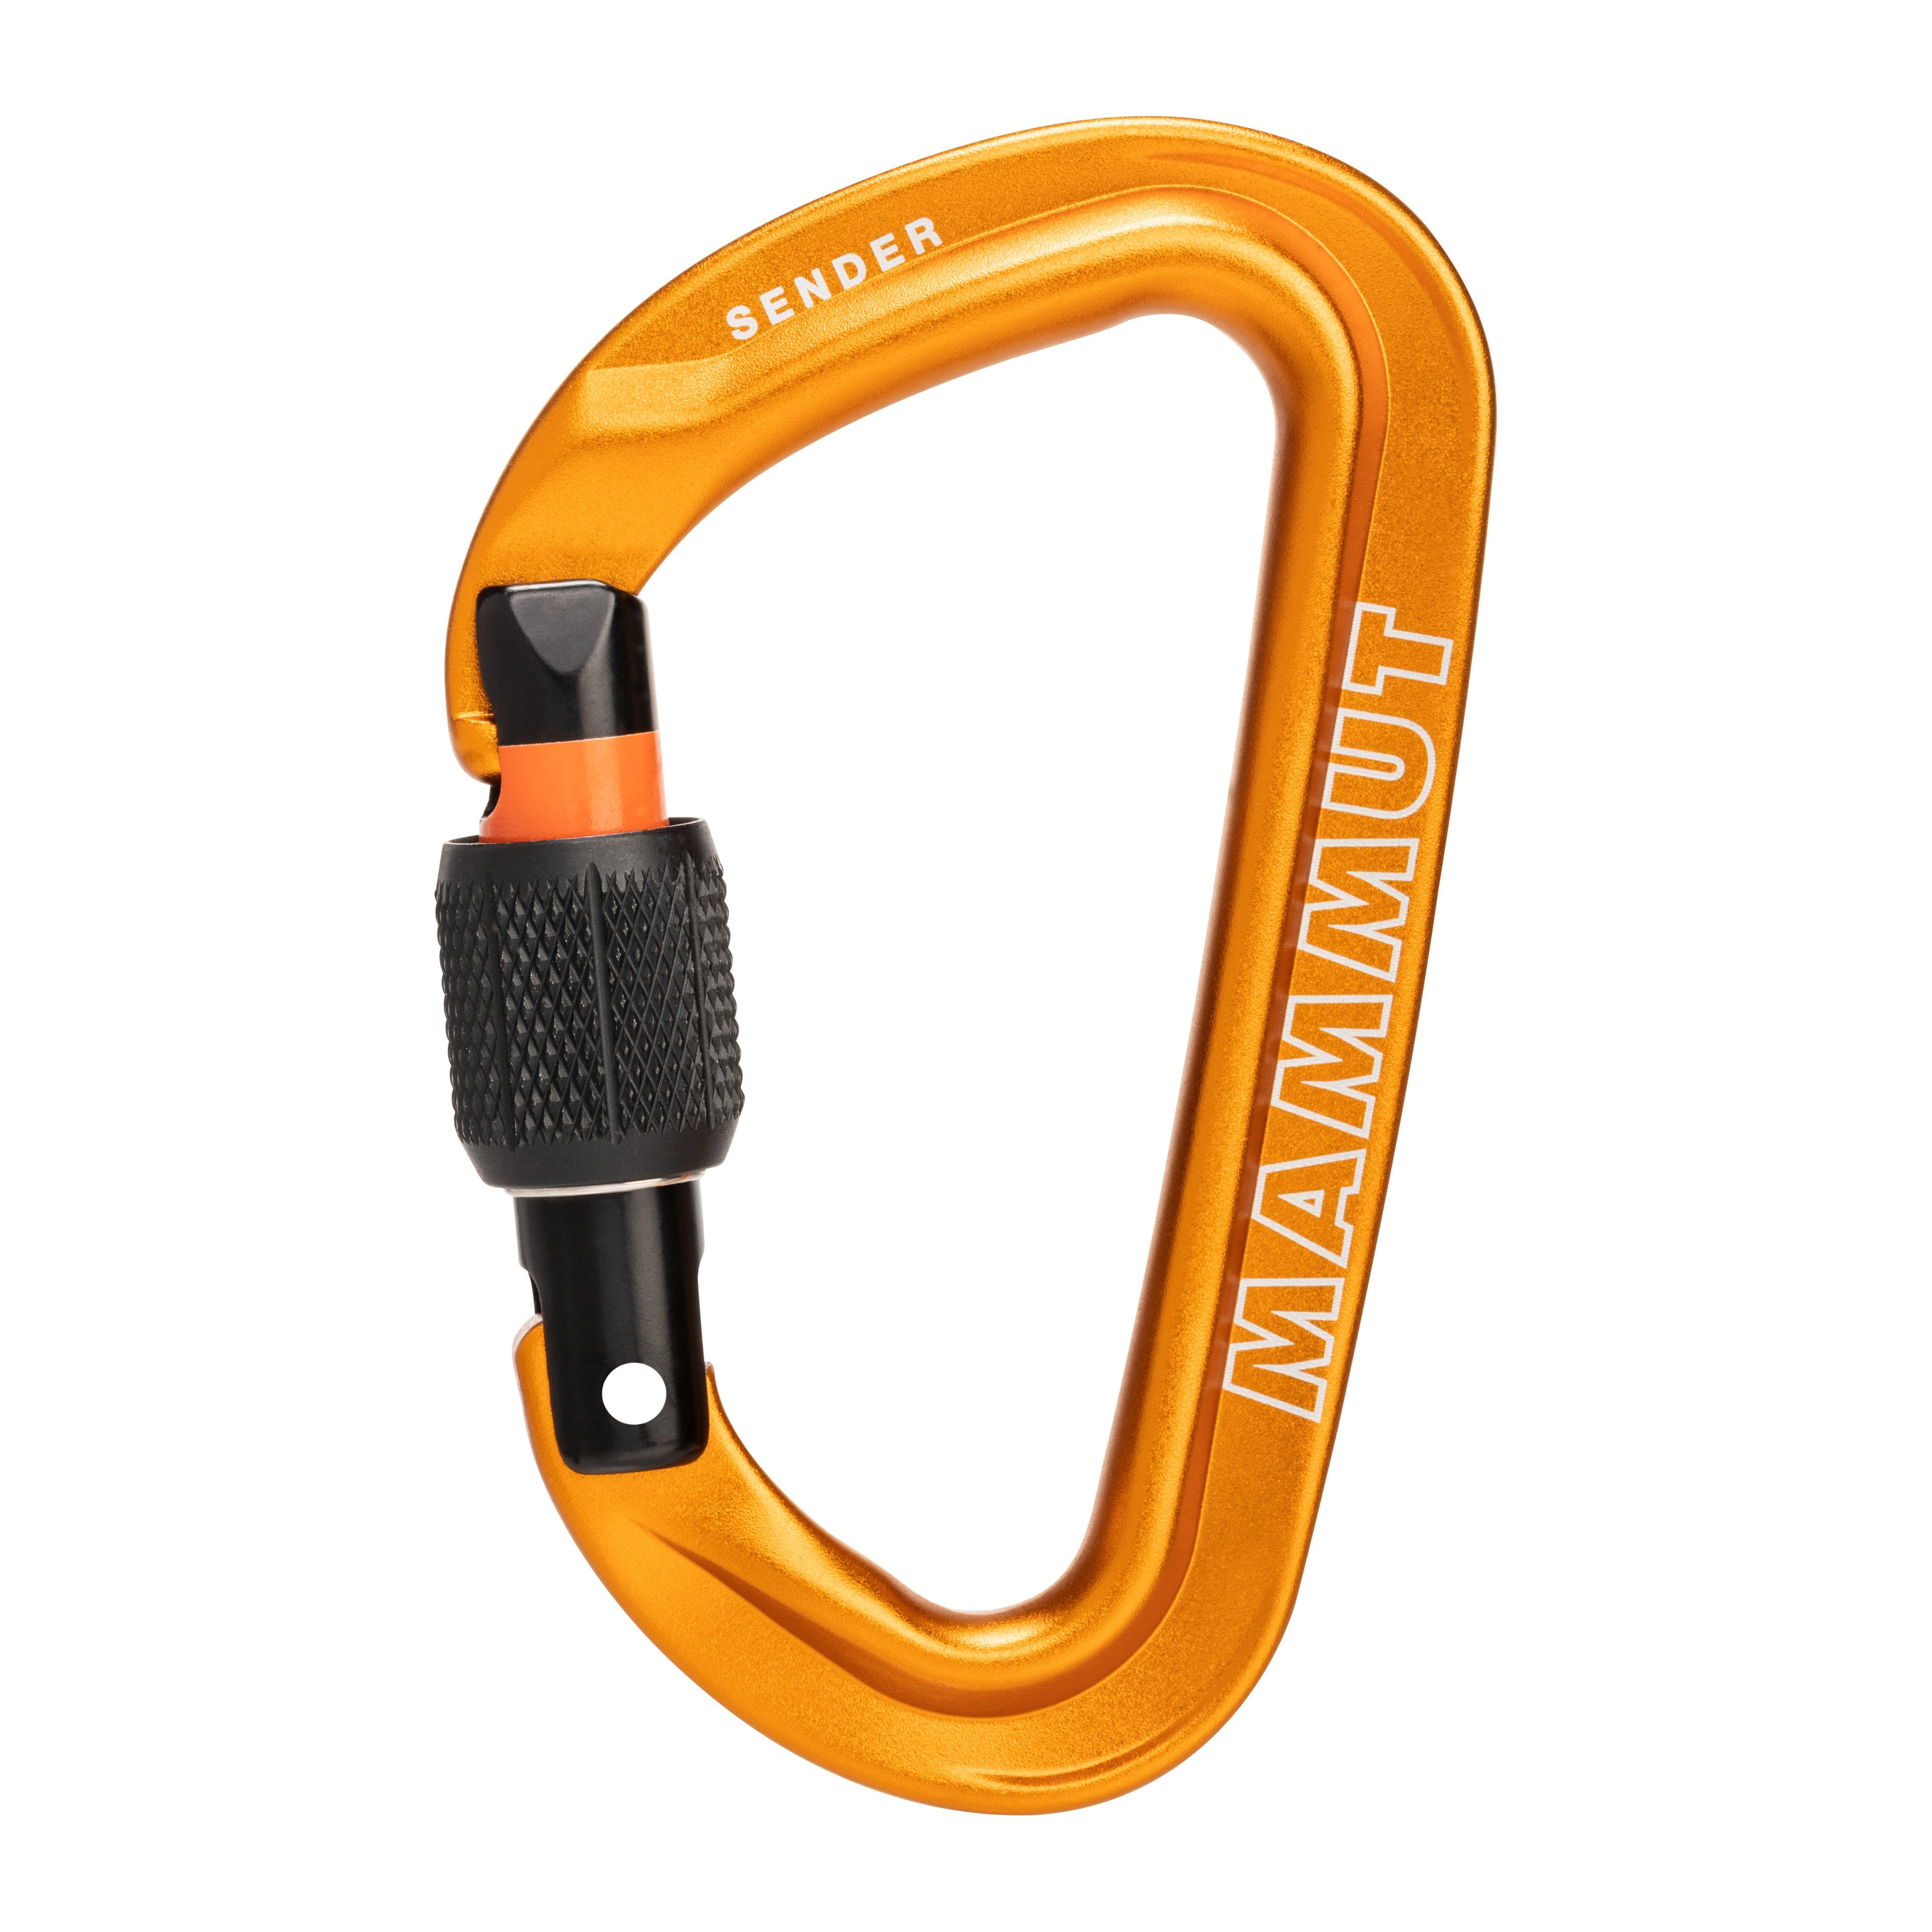 Sender Screwgate Carabiner - one size product image